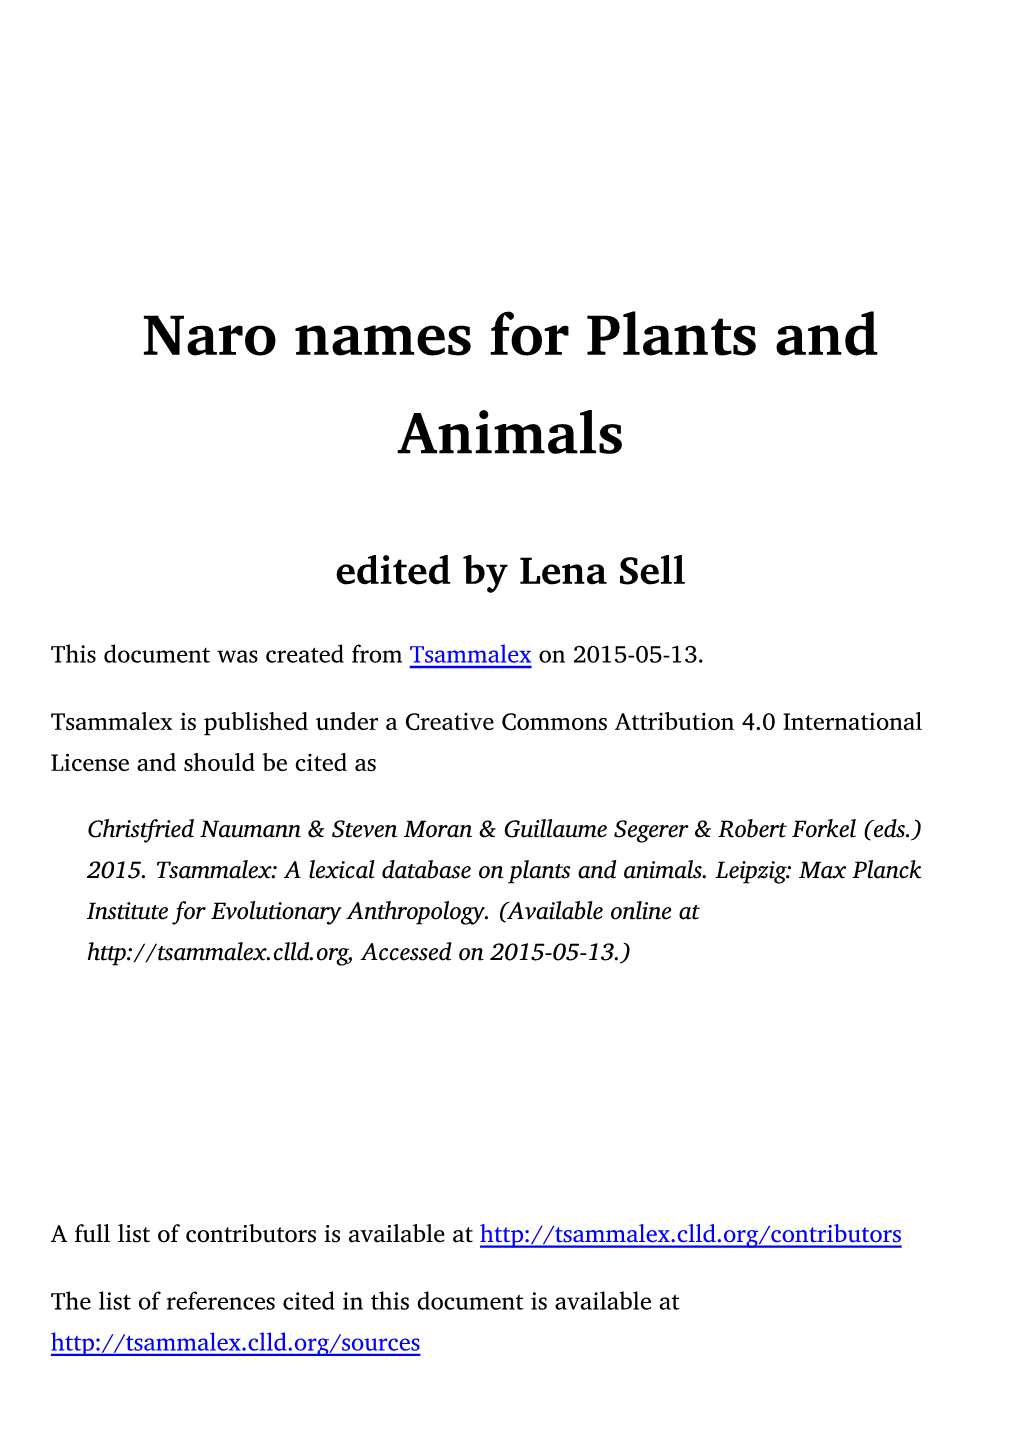 Naro Names for Plants and Animals